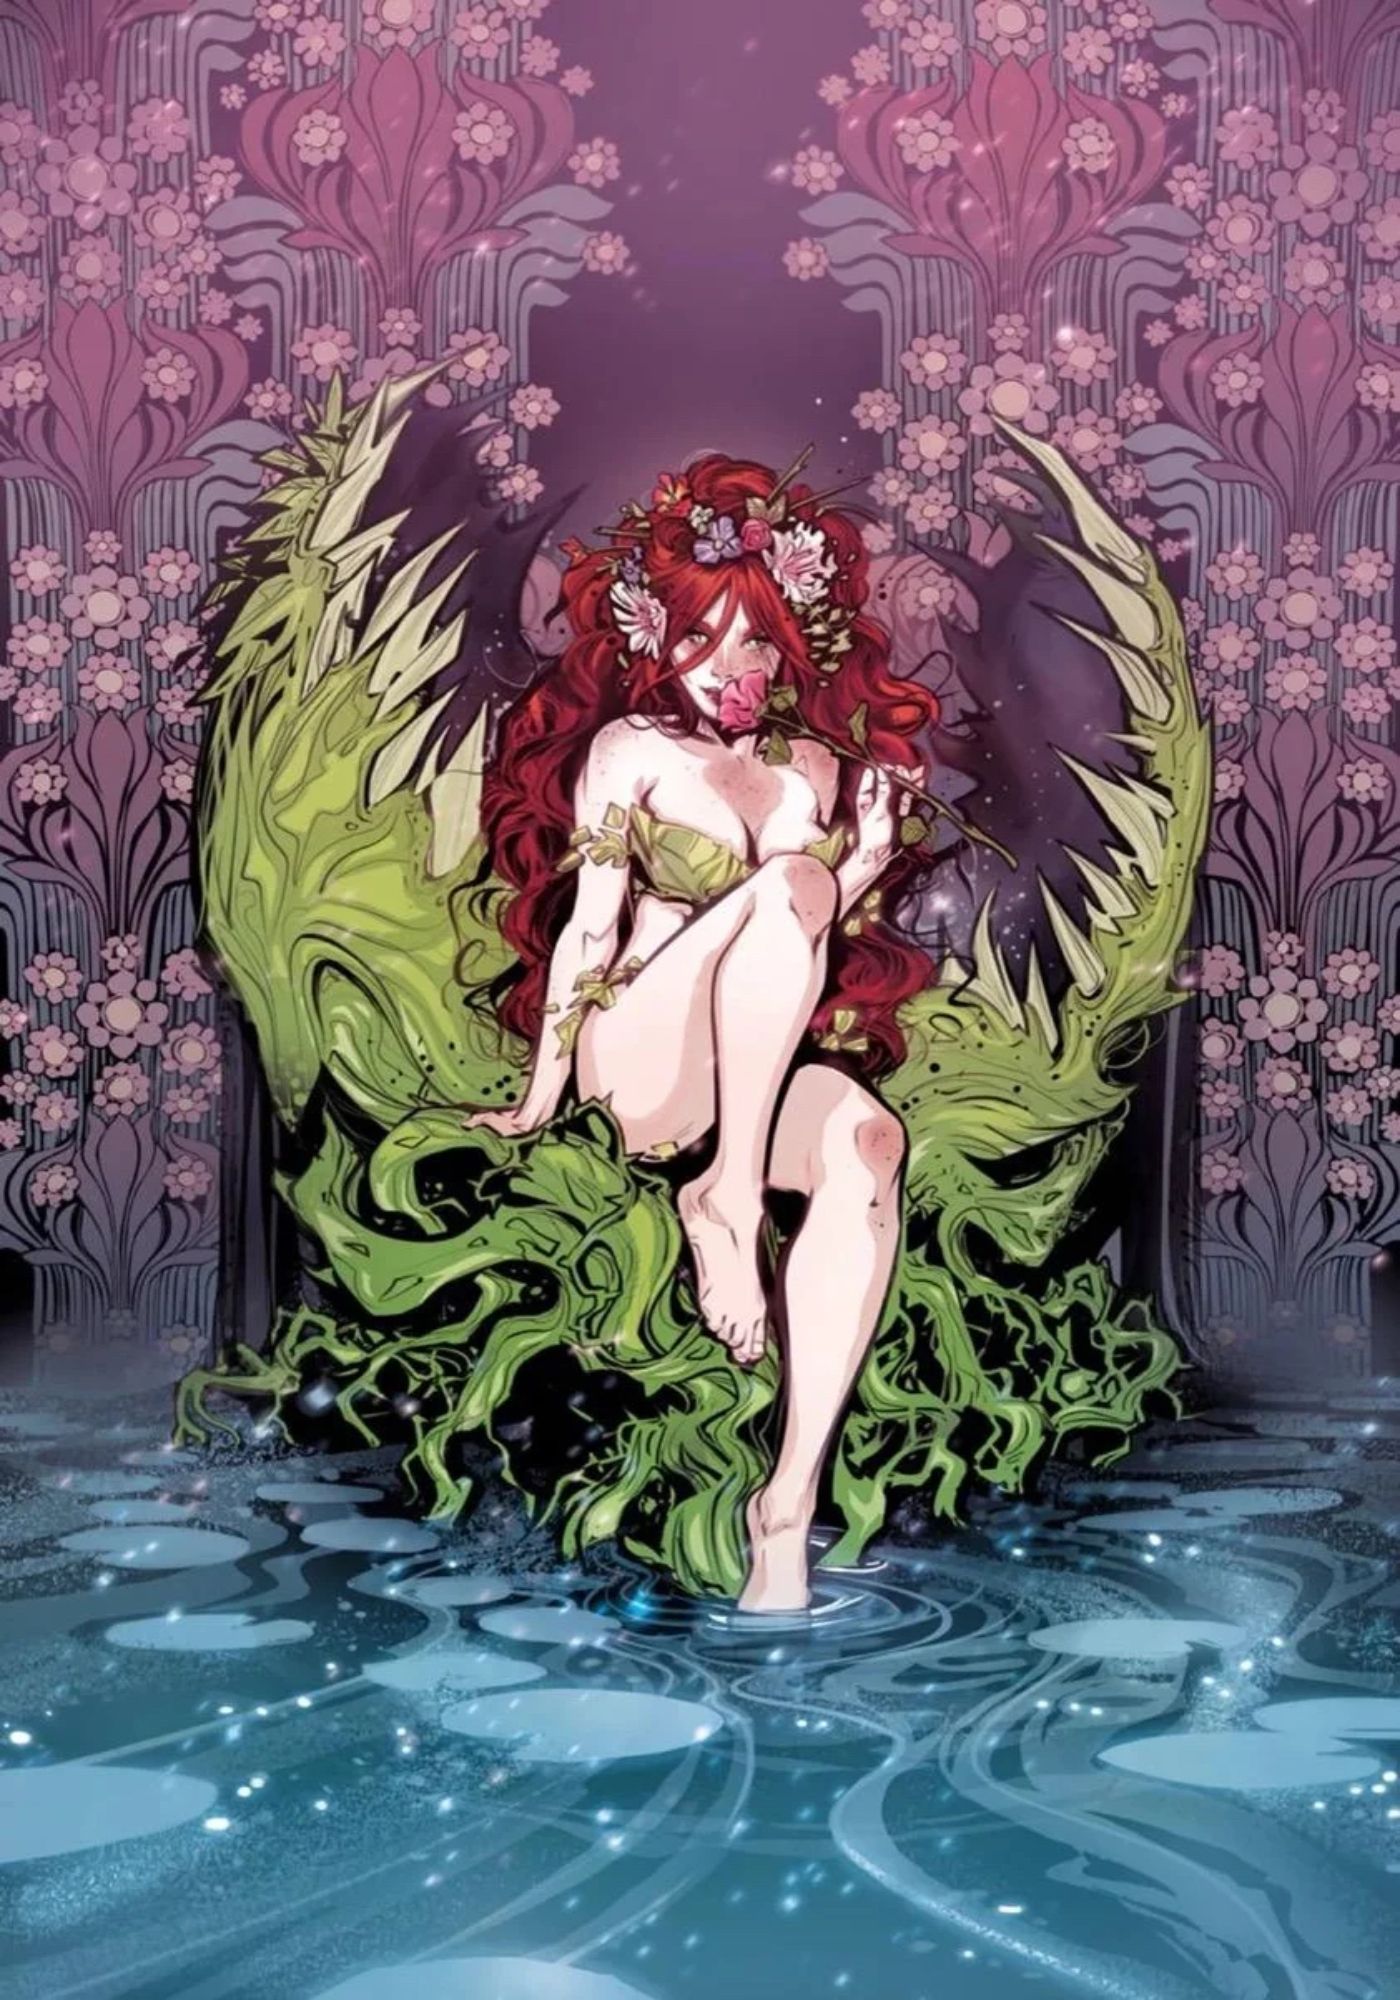 Poison Ivy’s DC Swimsuit Art Spotlights Her Incredible Powers & Beauty